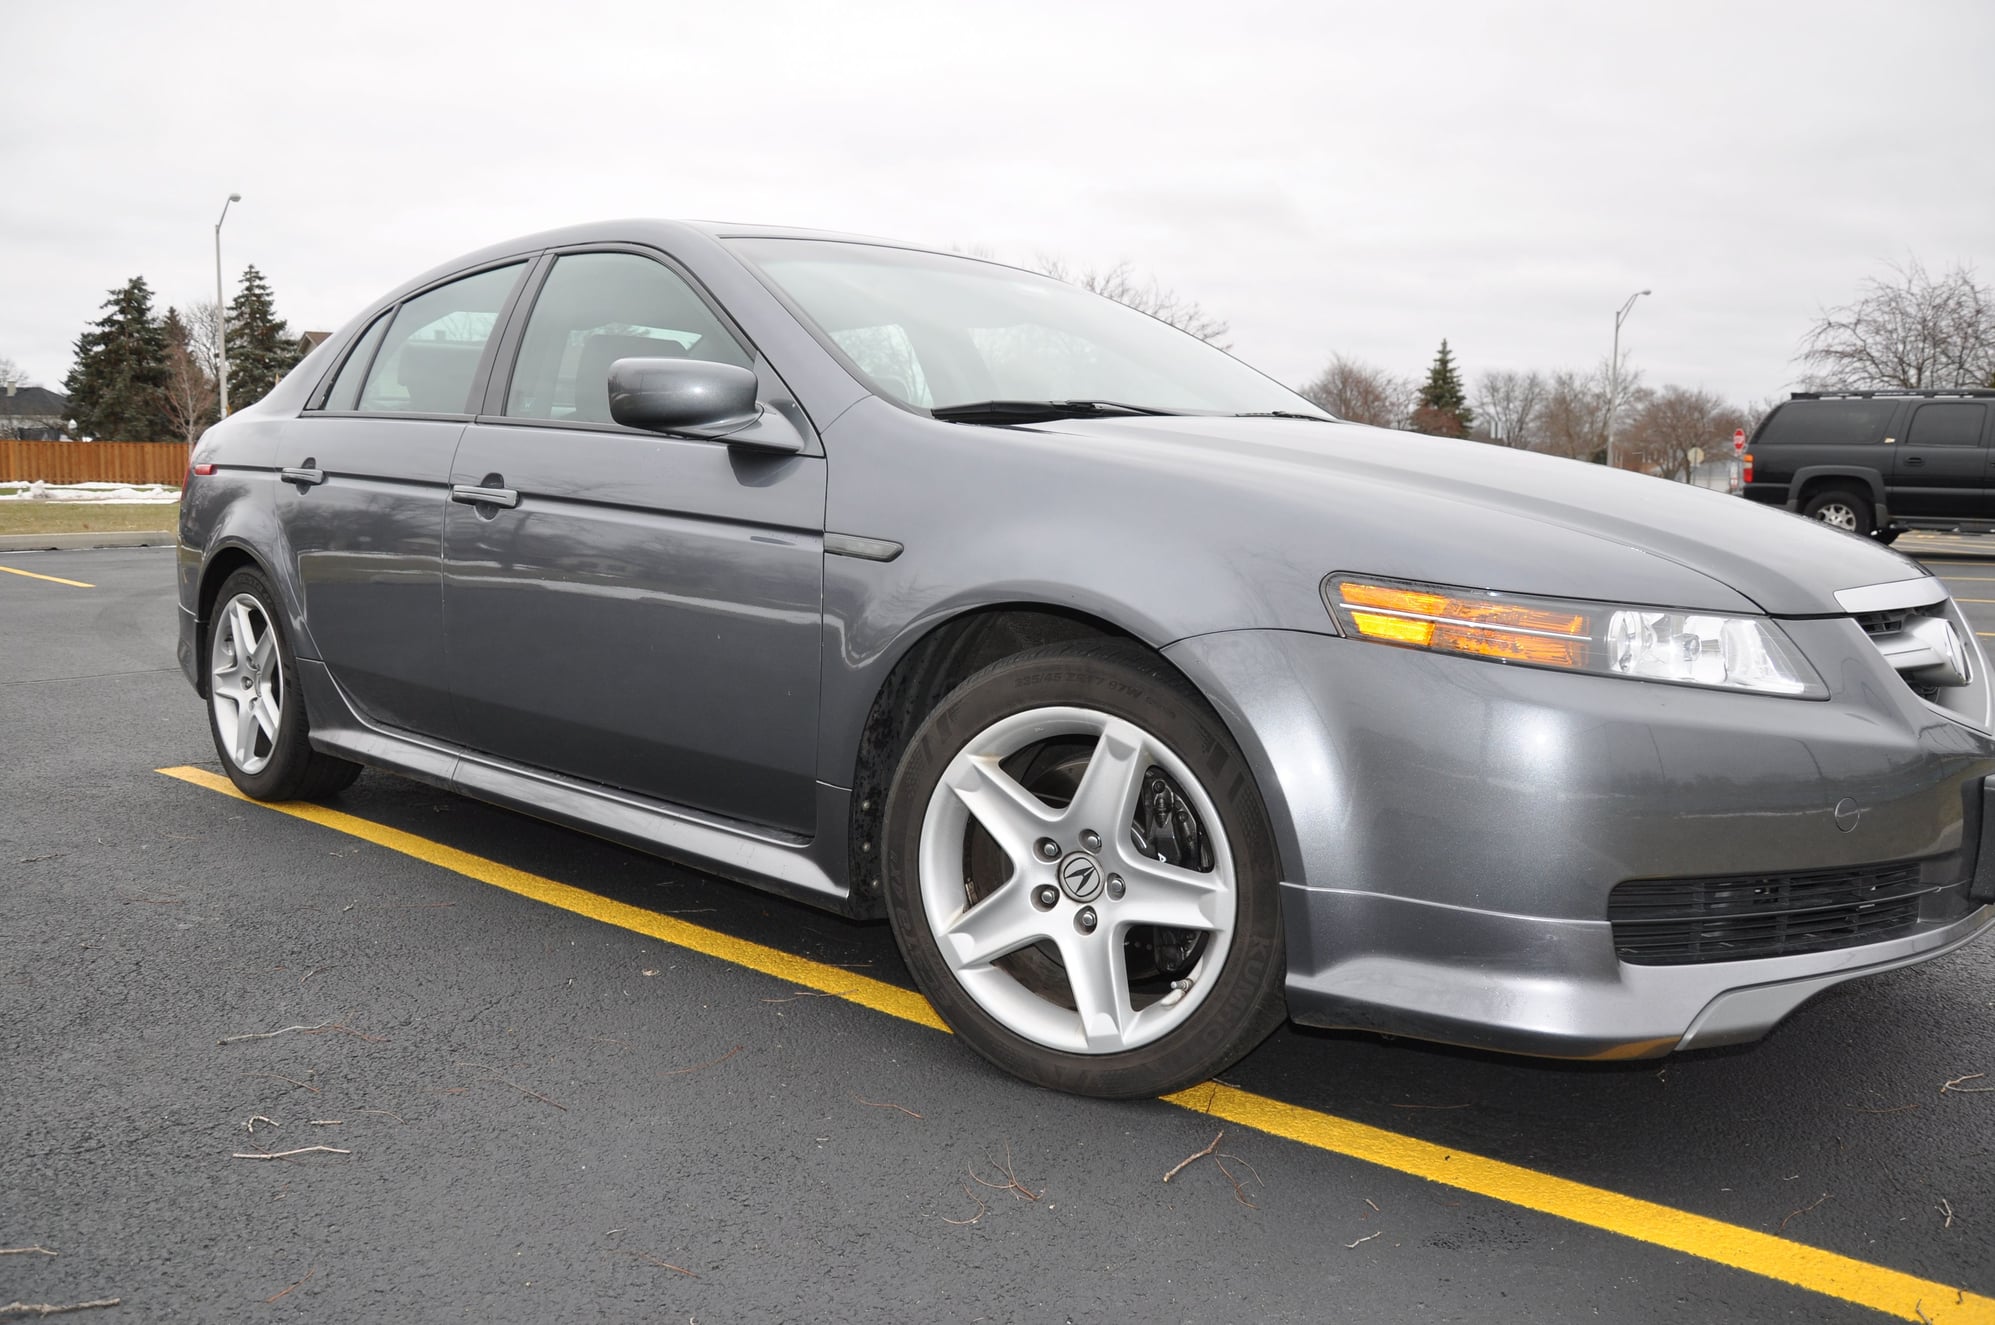 2006 Acura TL - SOLD: 2006 Acura TL 6sp Manual, 62,000 miles, mint condition - Used - VIN 19UUA65546A039670 - 62,000 Miles - 6 cyl - 2WD - Manual - Sedan - Gray - Hoffman Estates, IL 60192, United States